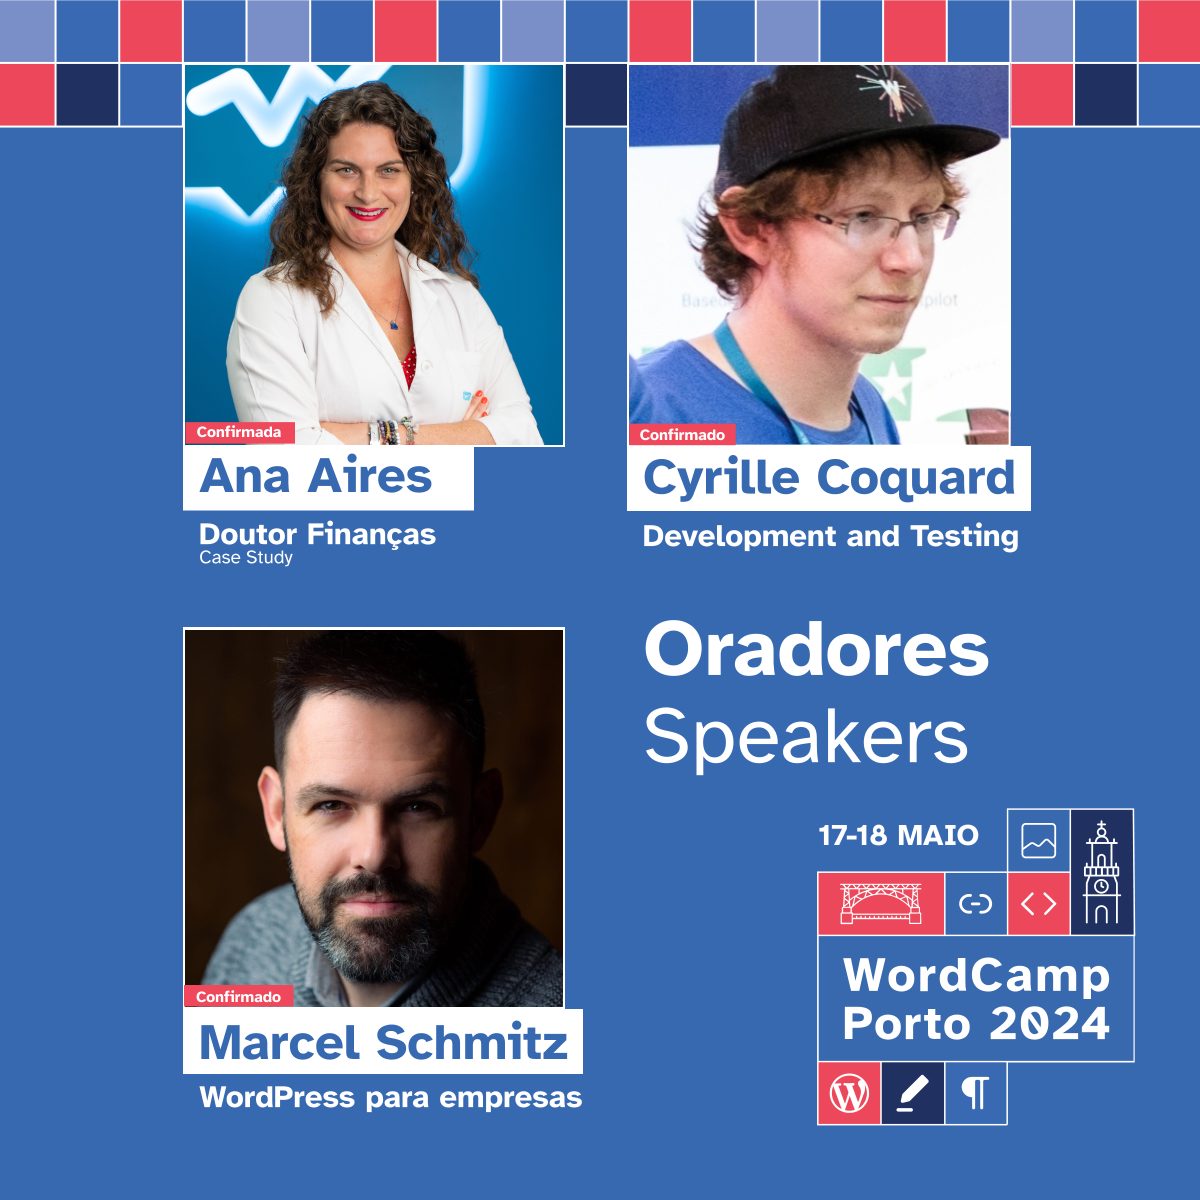 First batch of speakers announced